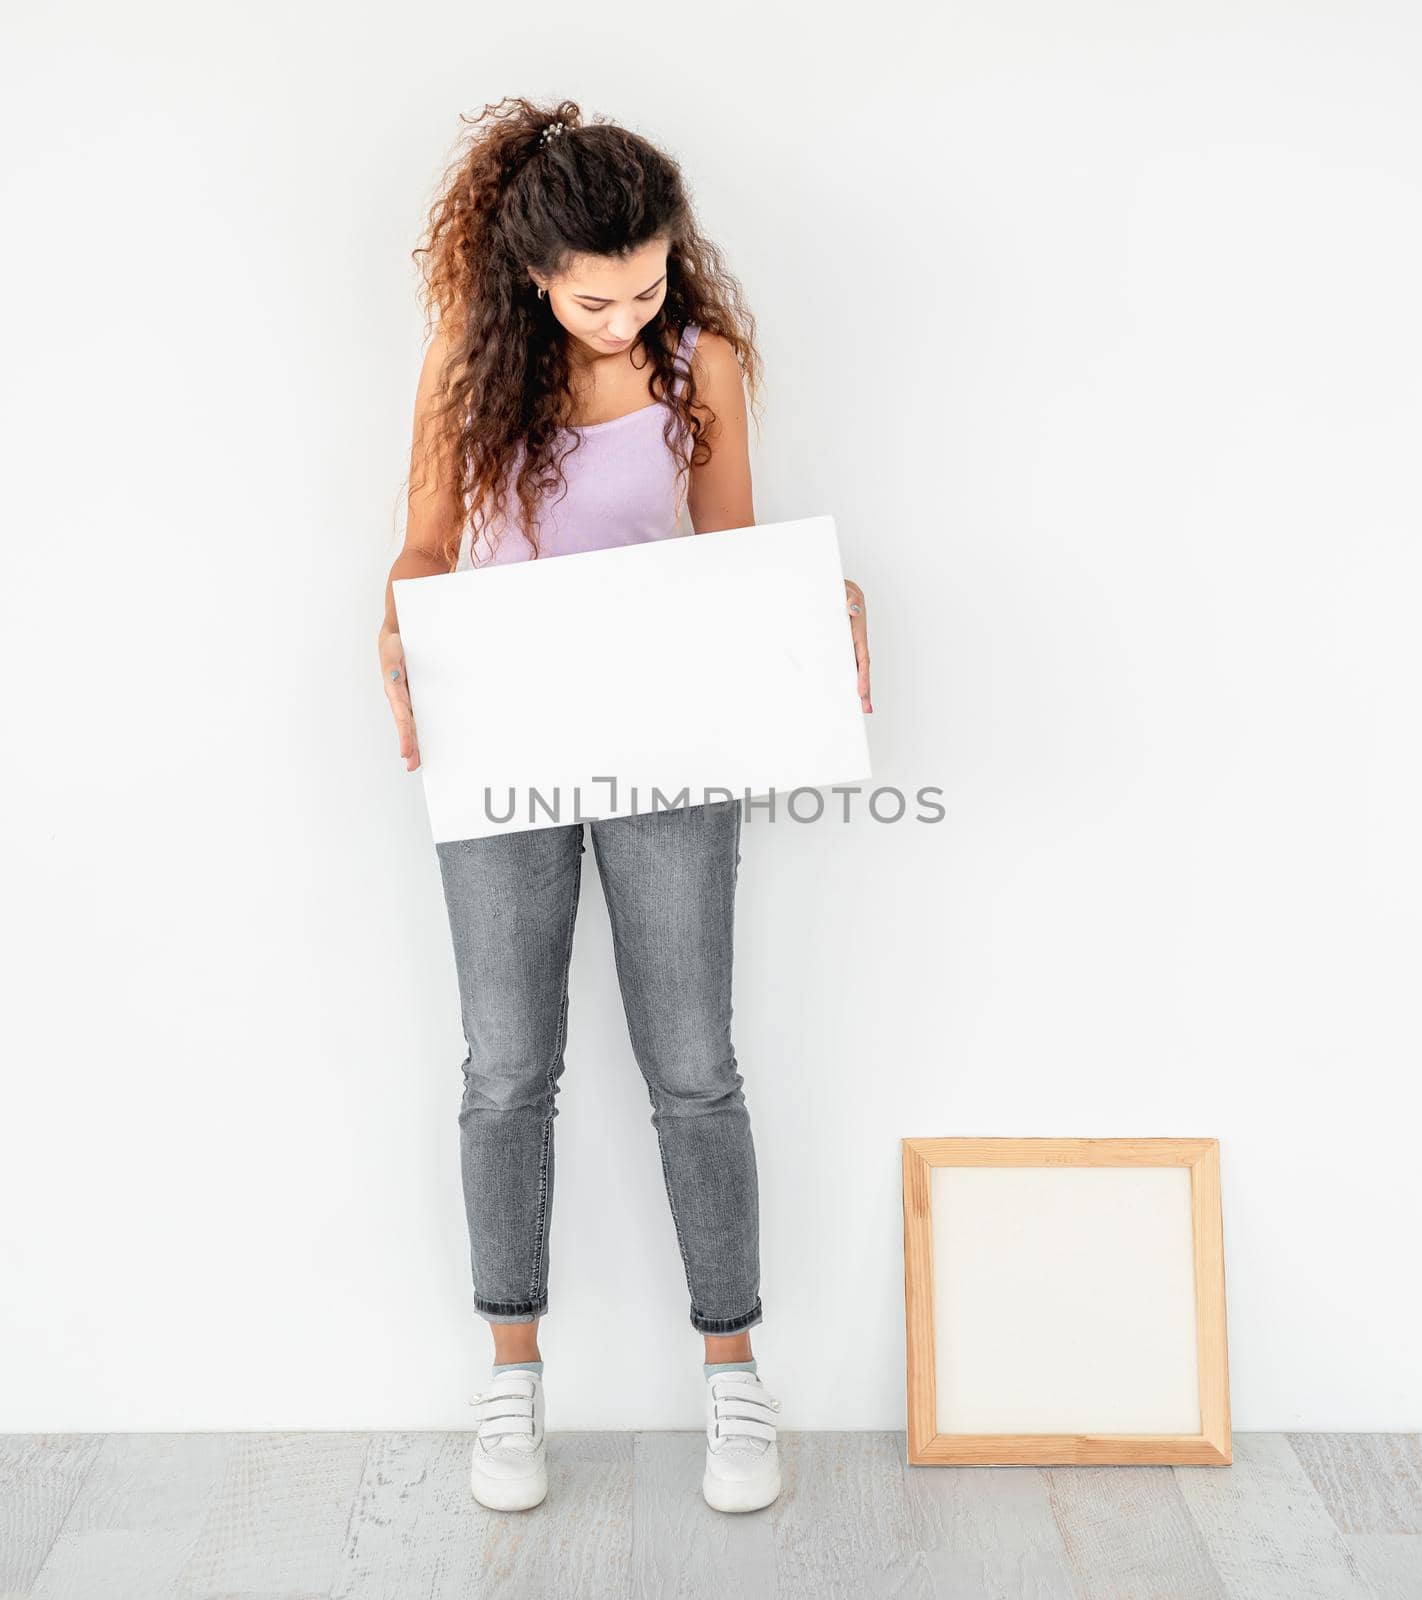 Cute girl standing near frame with empty canvas in her hands